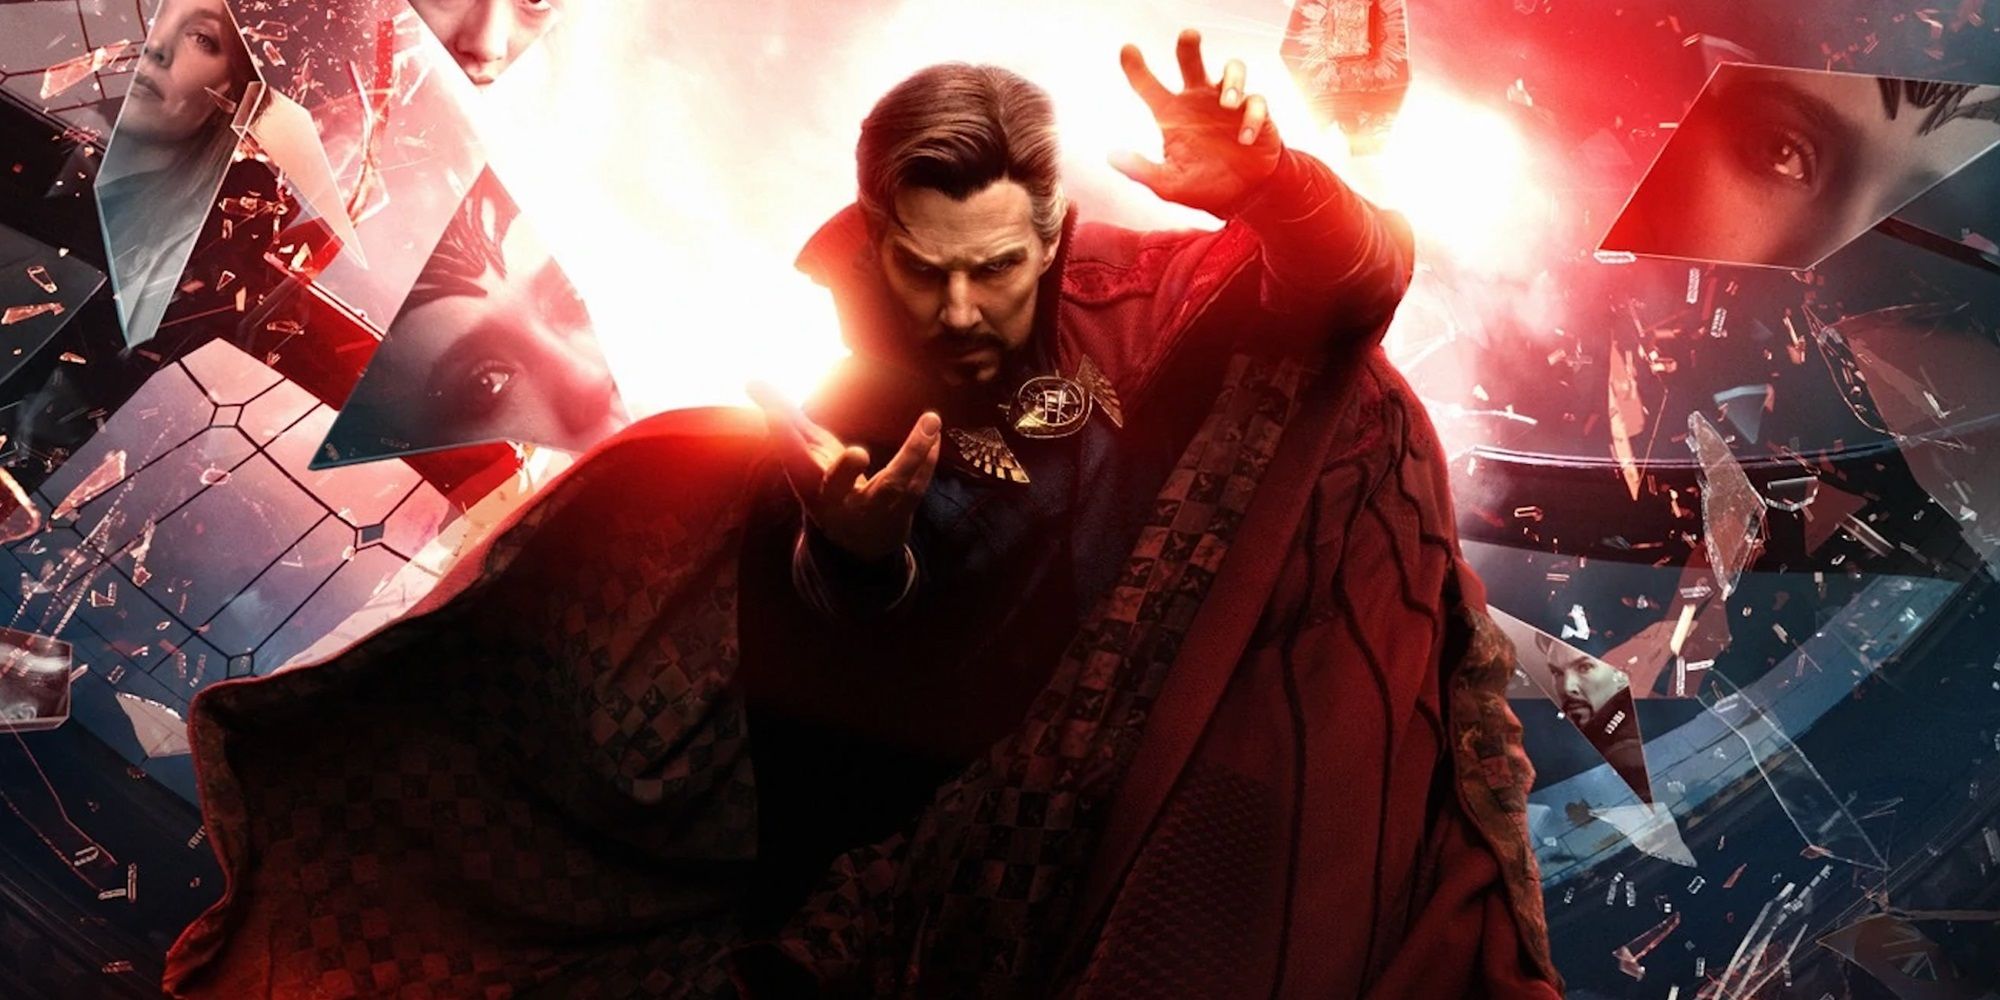 The poster for Doctor Strange in the Multiverse of Madness